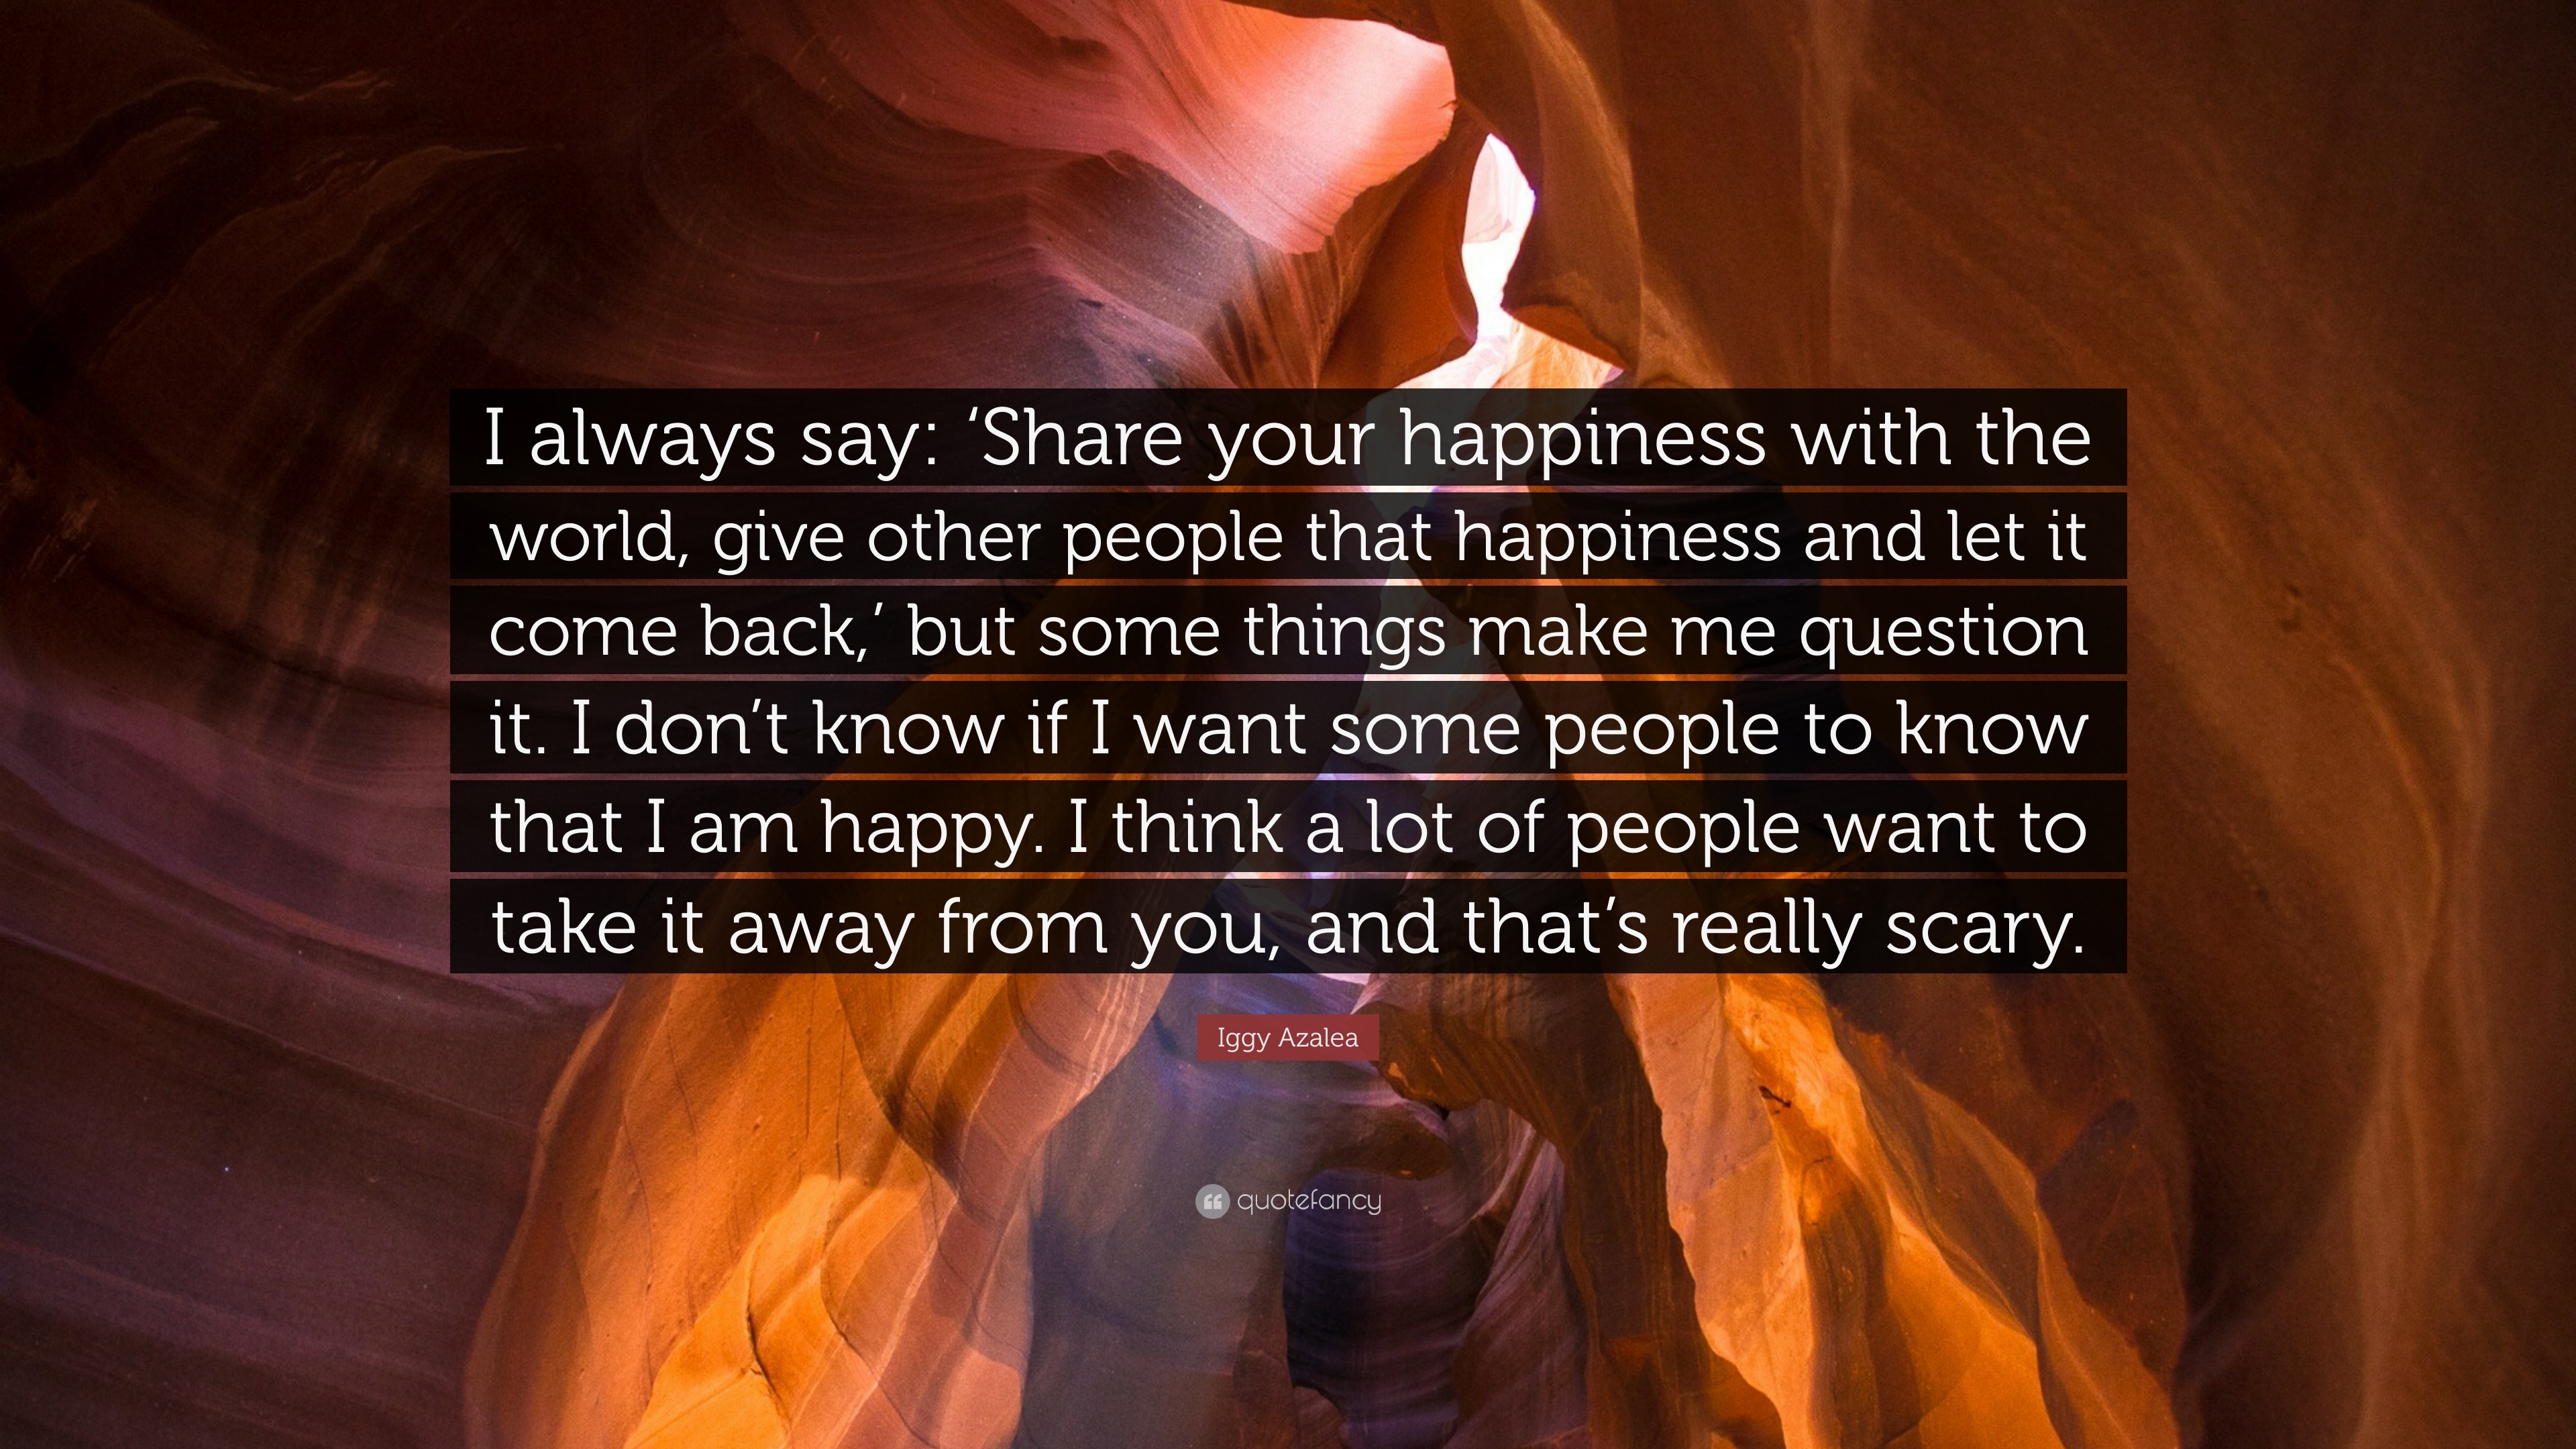 Iggy Azalea Quote: “I always say: ‘Share your happiness with the world ...